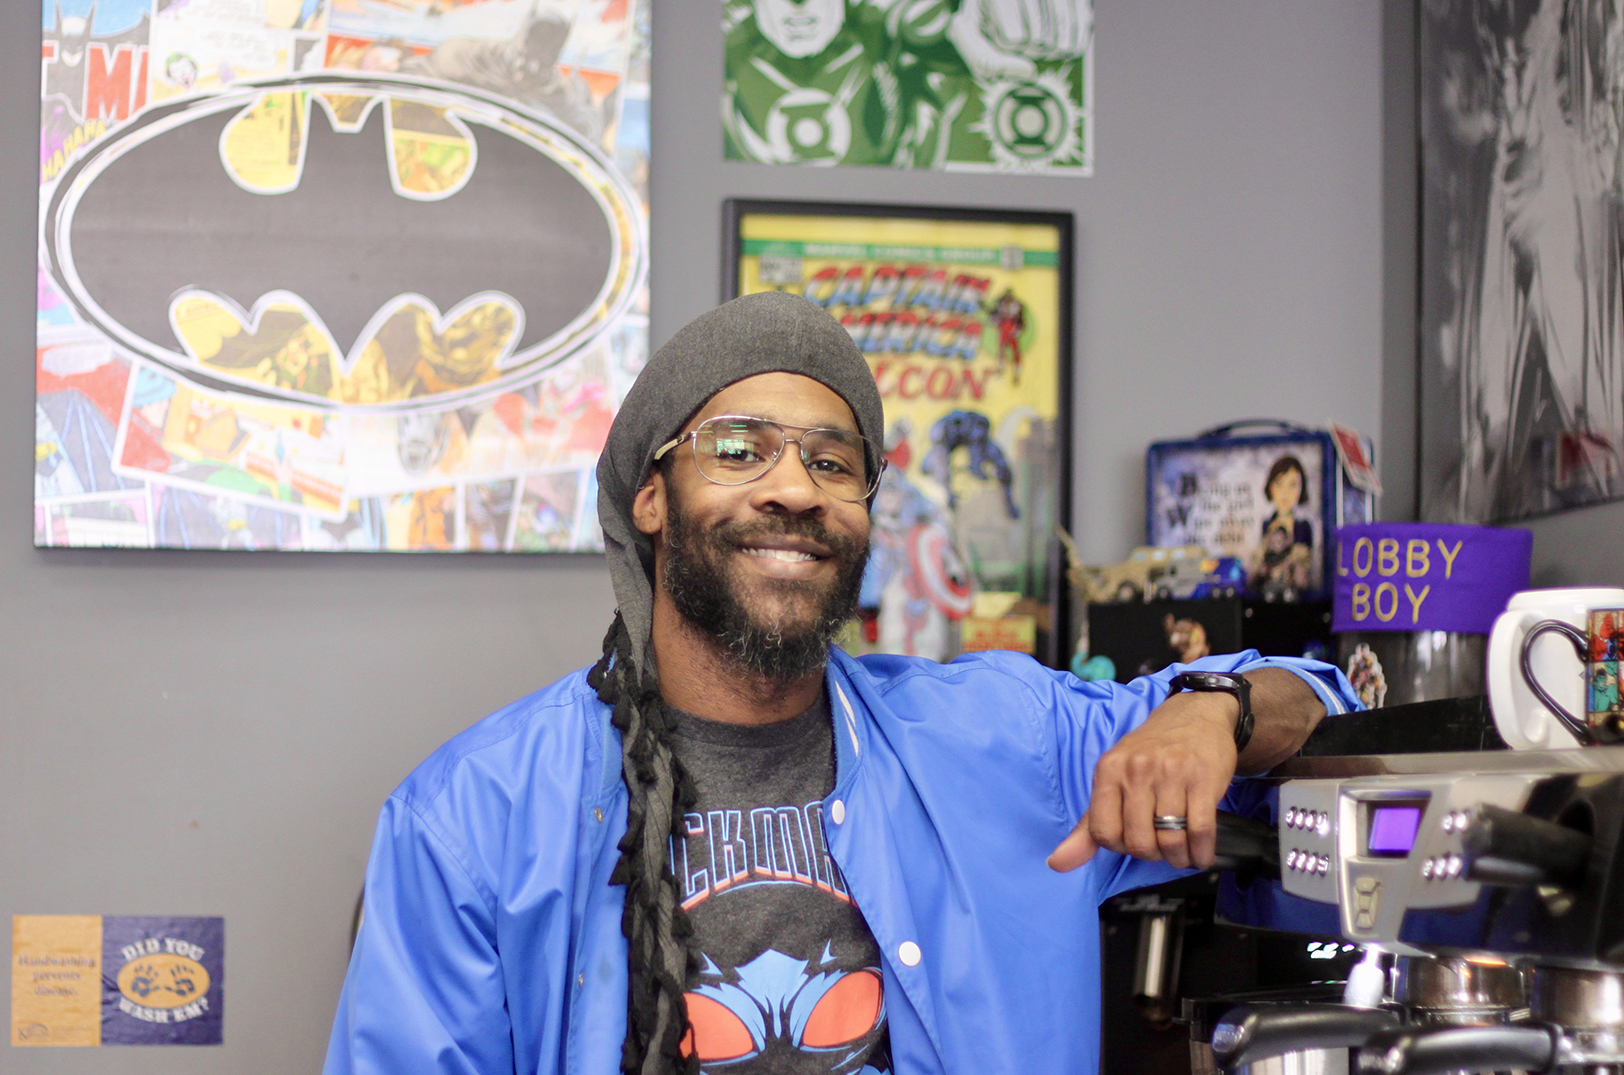 Coffee shop owner (and superhero super fan) pours himself into the pages of Darkmoon Comics